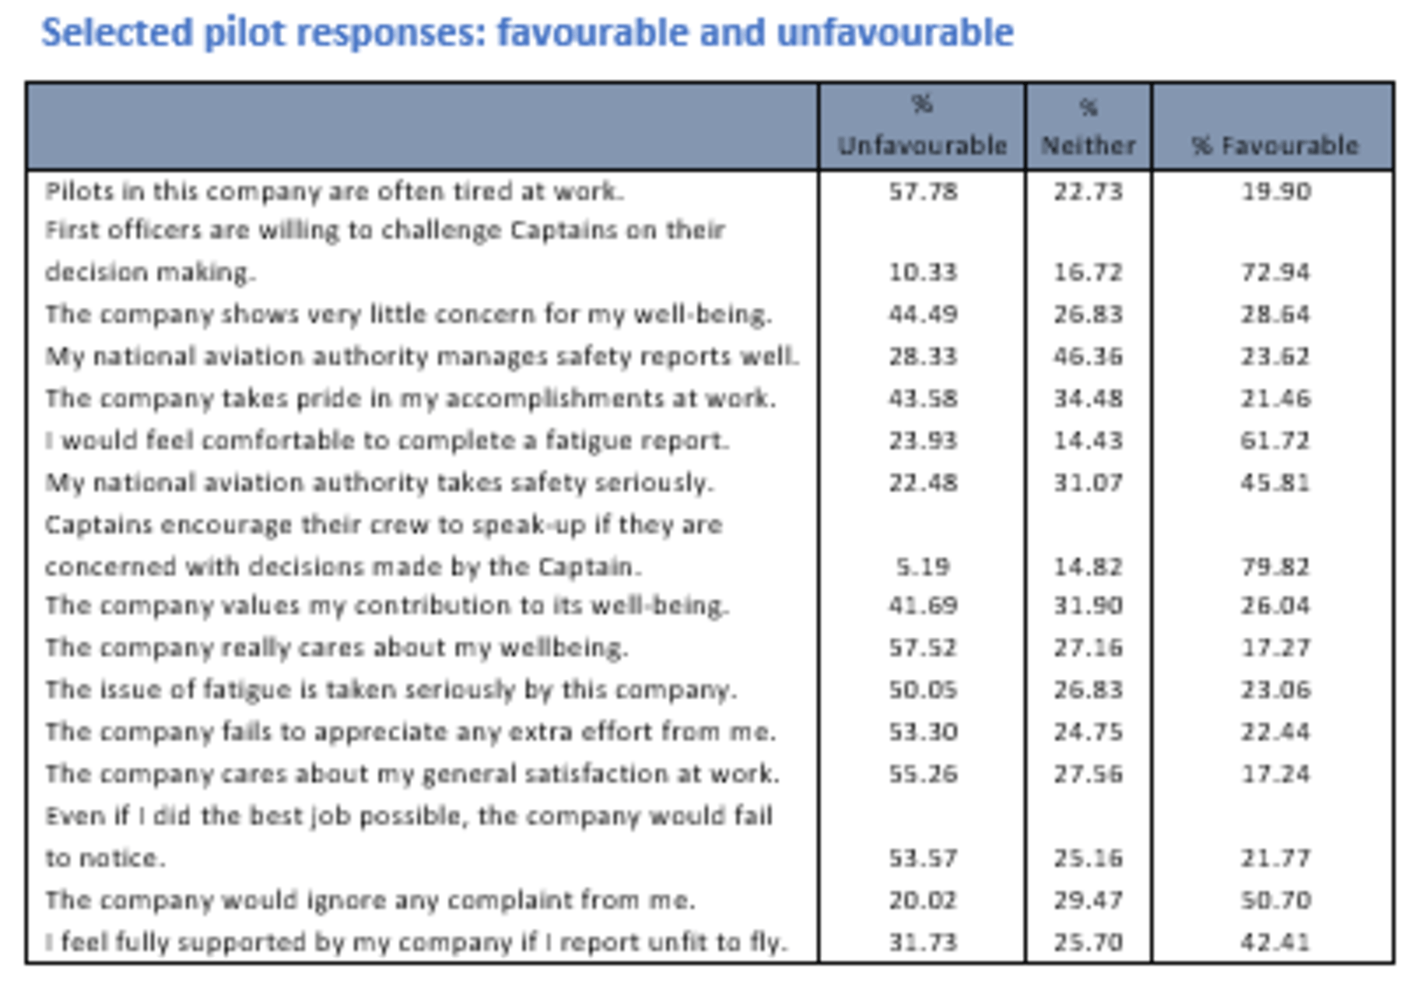 Selected pilots’ responses to survey.